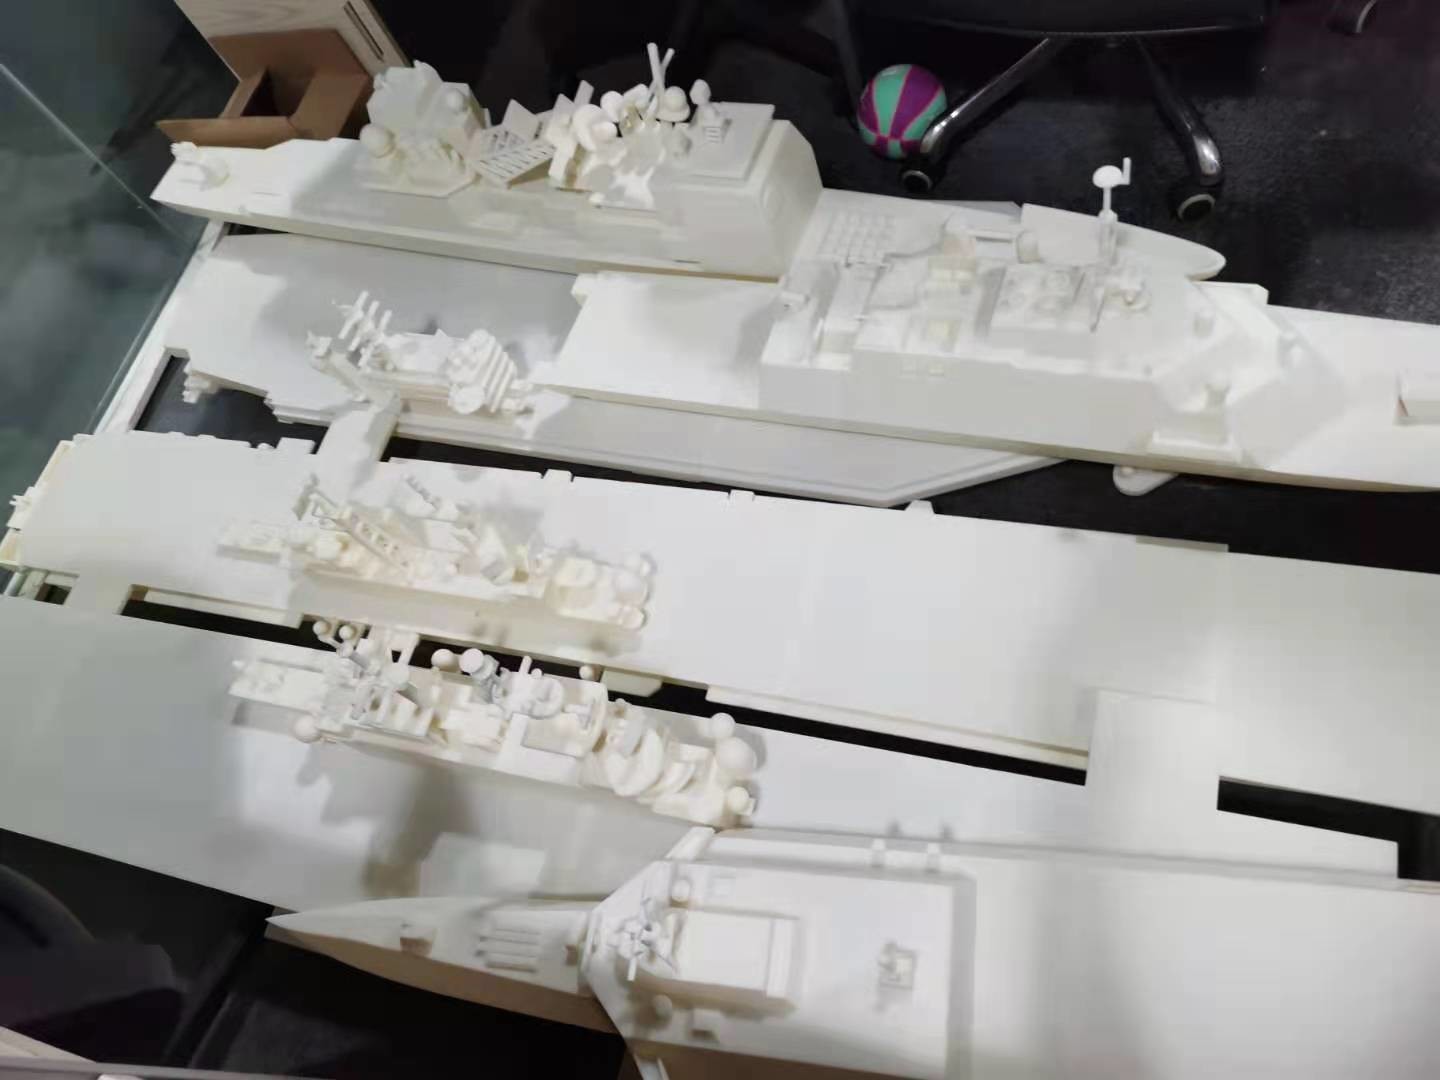  Aircraft Carrier Industrial FDM 3D Printing Service With Brushing Manufactures